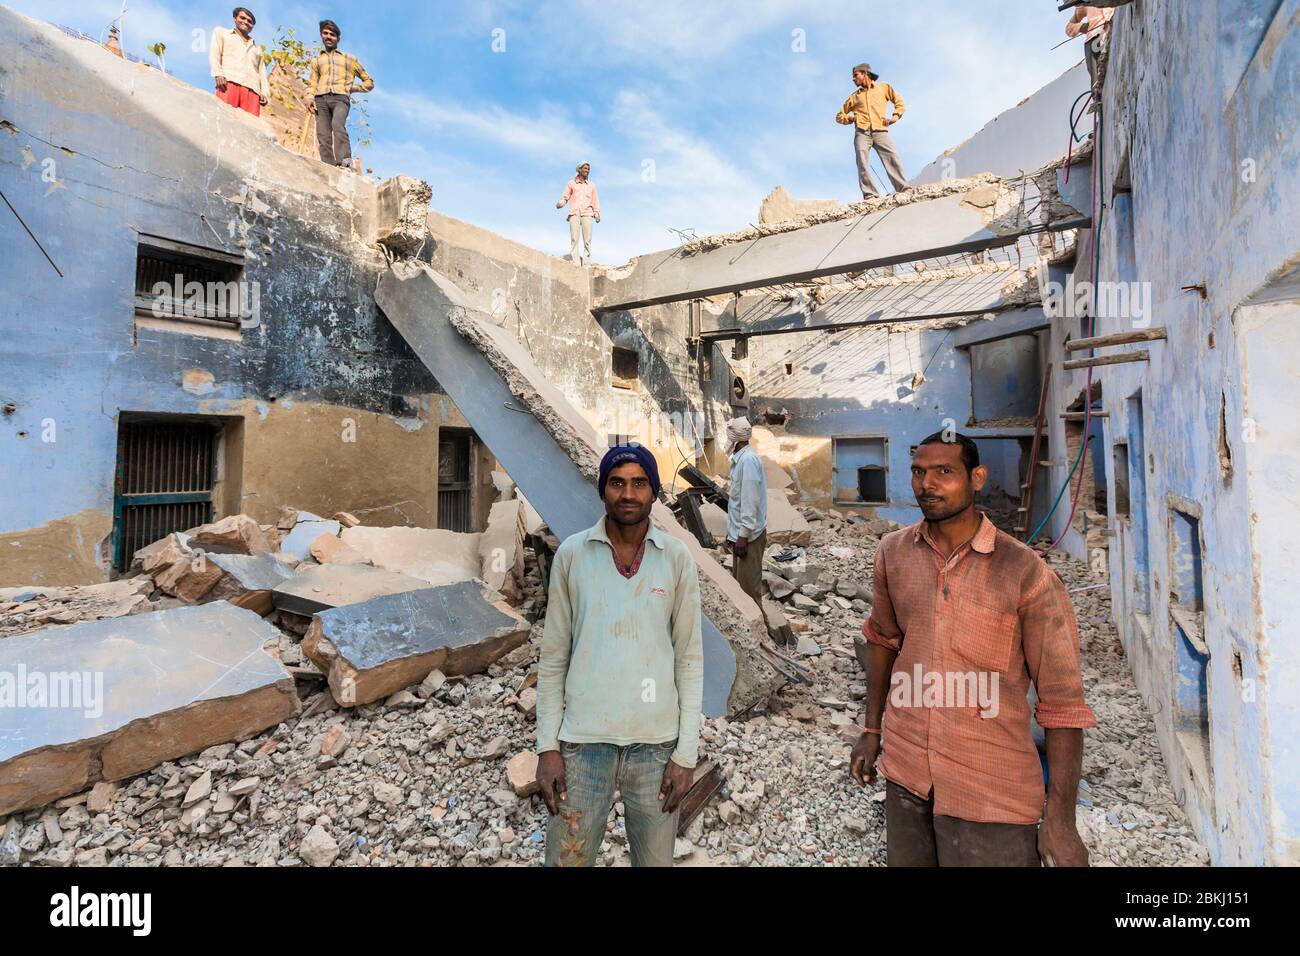 India, Gujarat State, Kutch region, Bhuj city, workers in collapsed building following an earthquake Stock Photo